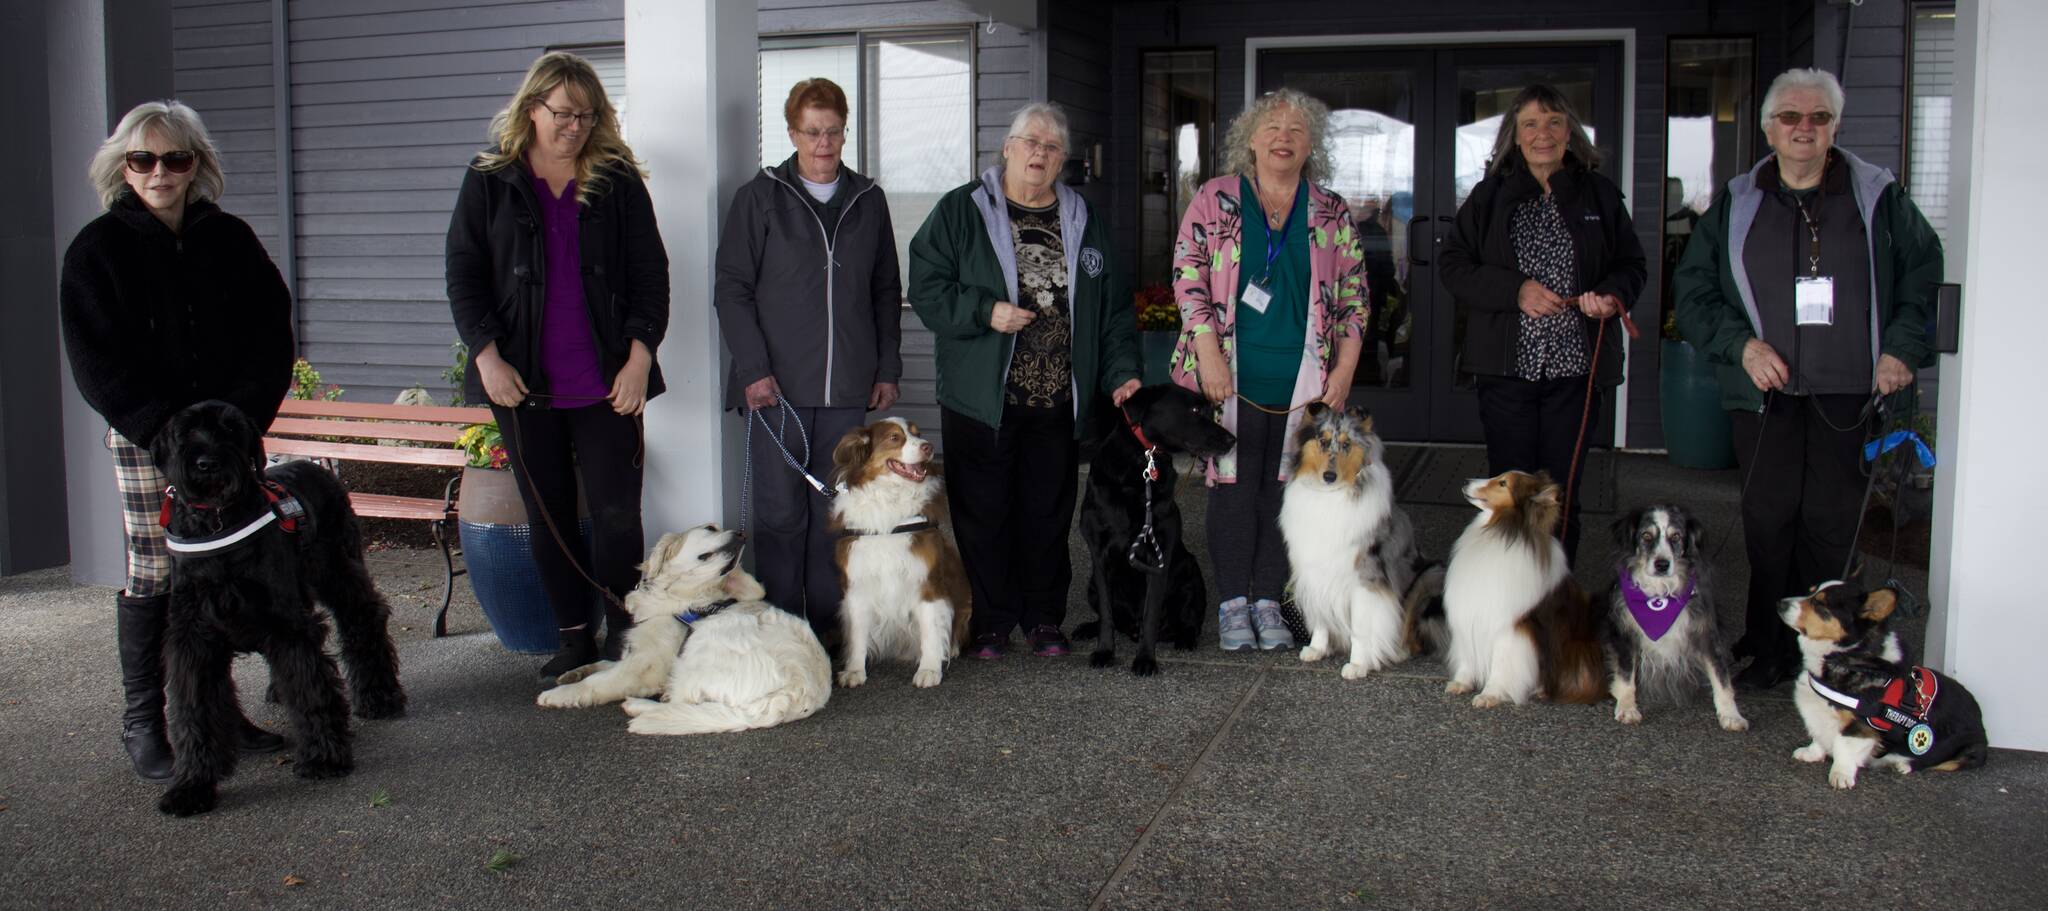 Photos by Rachel Rosen/Whidbey News-Times
From left, Barbara Kruse and Cosmo, Shelley Jackson and Falkor, Susen Dasch and Dillon, Peggy Lavier and Rowdy, Julie Gorveatt and Sonoma, Marilyn Lindsey and Fazer, and Pat Lamont and Rose and Jack.